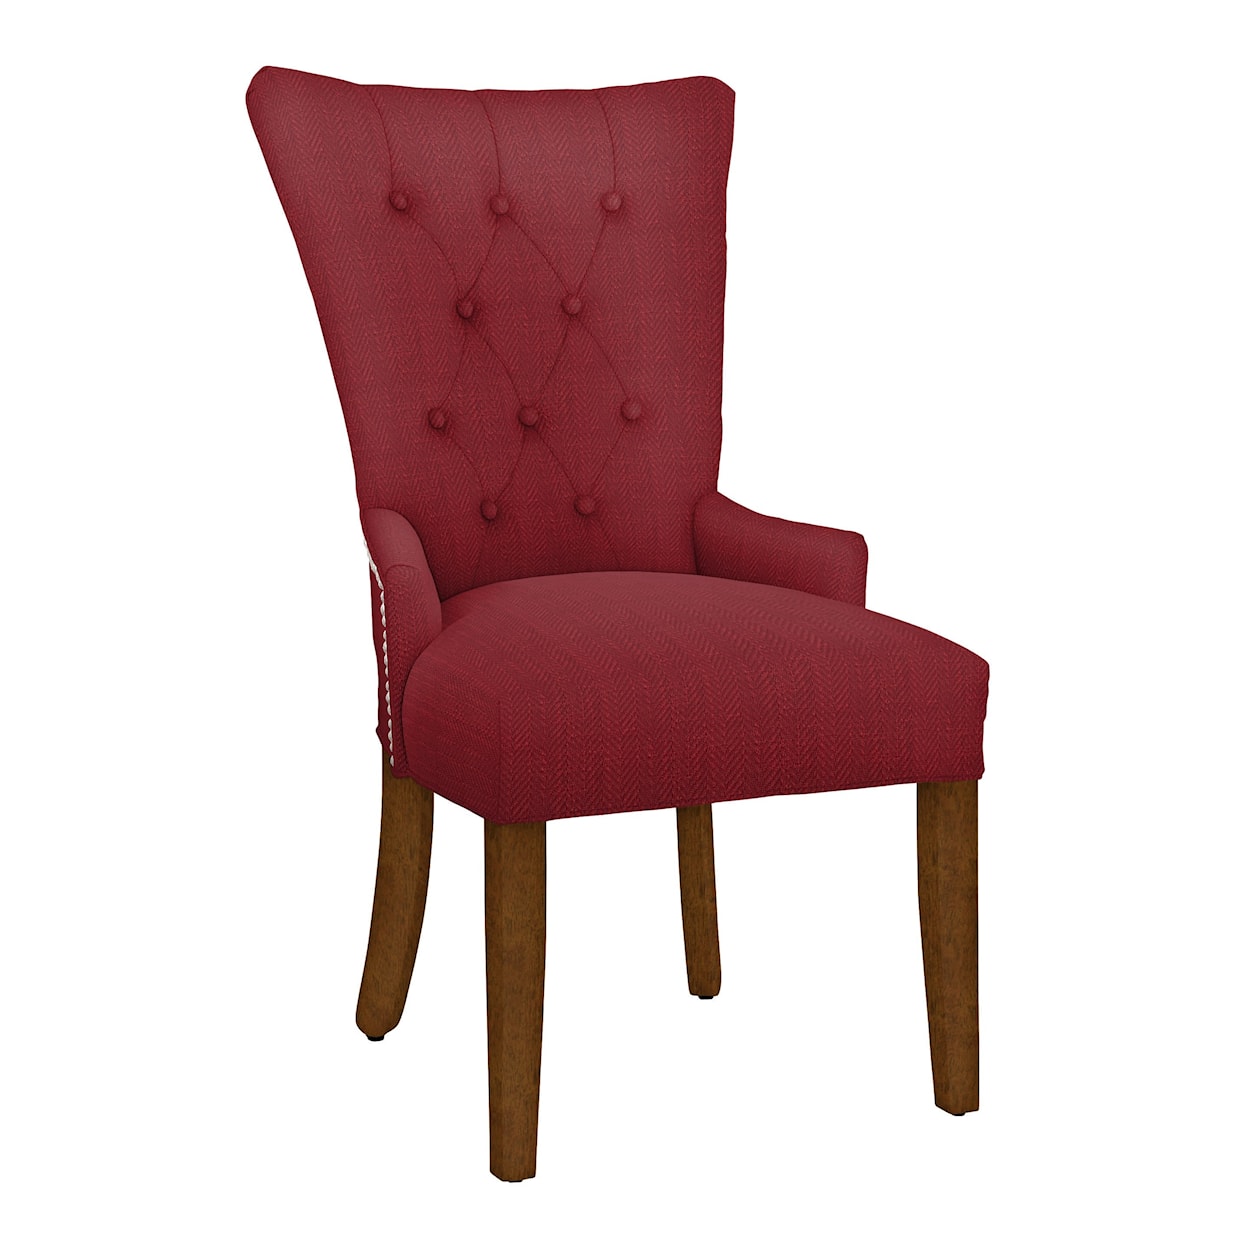 Hekman Upholstery Sandra Dining Chair with Nailheads